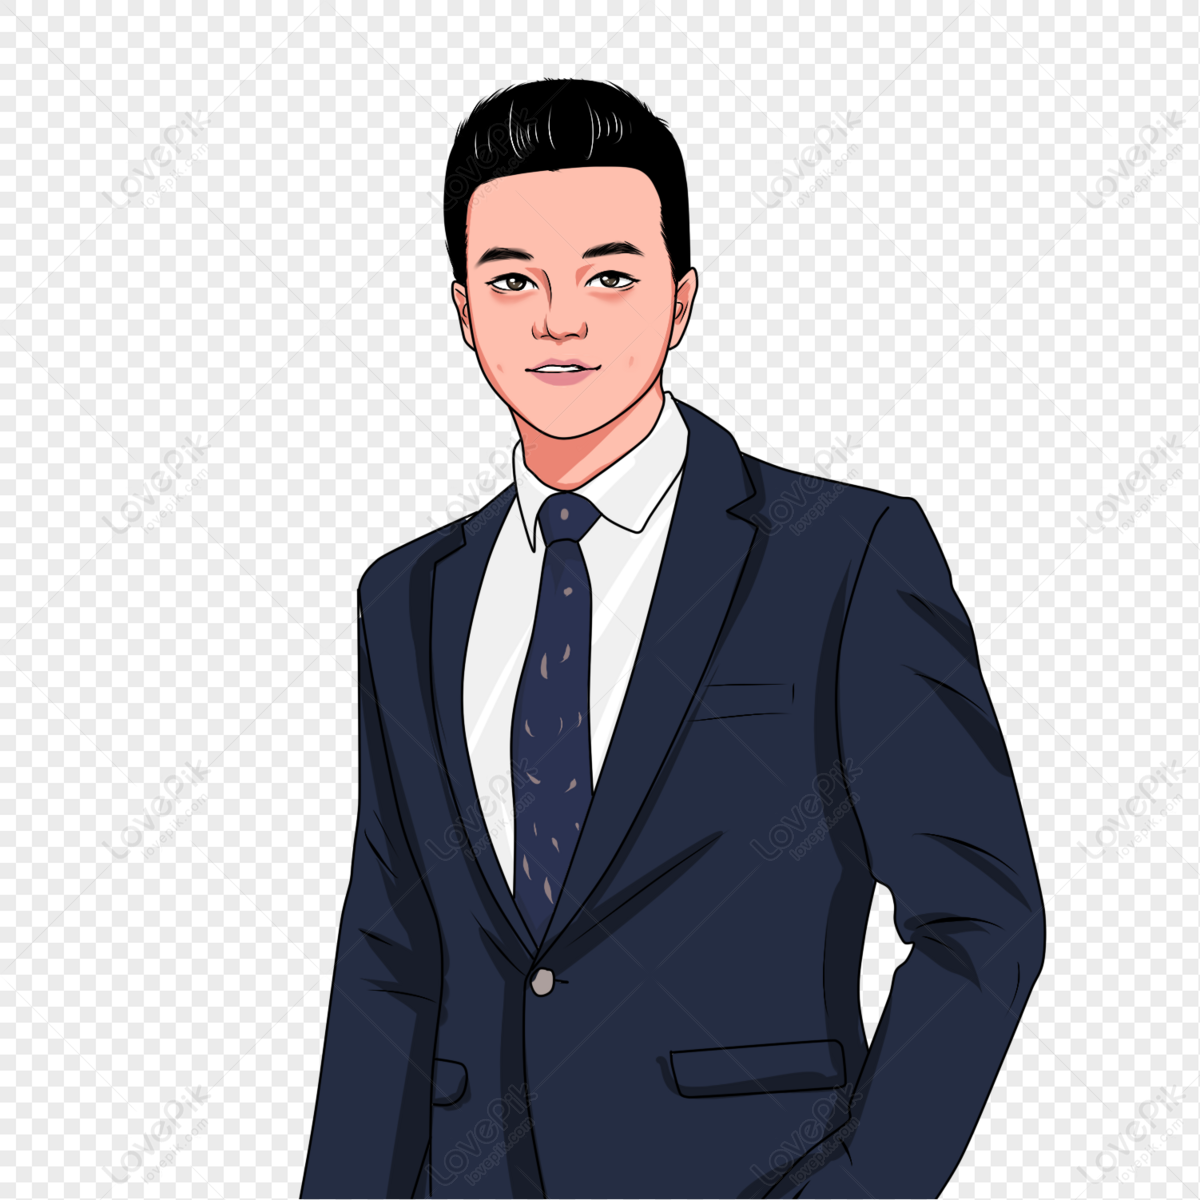 Man In A Suit Free PNG And Clipart Image For Free Download - Lovepik |  401227379